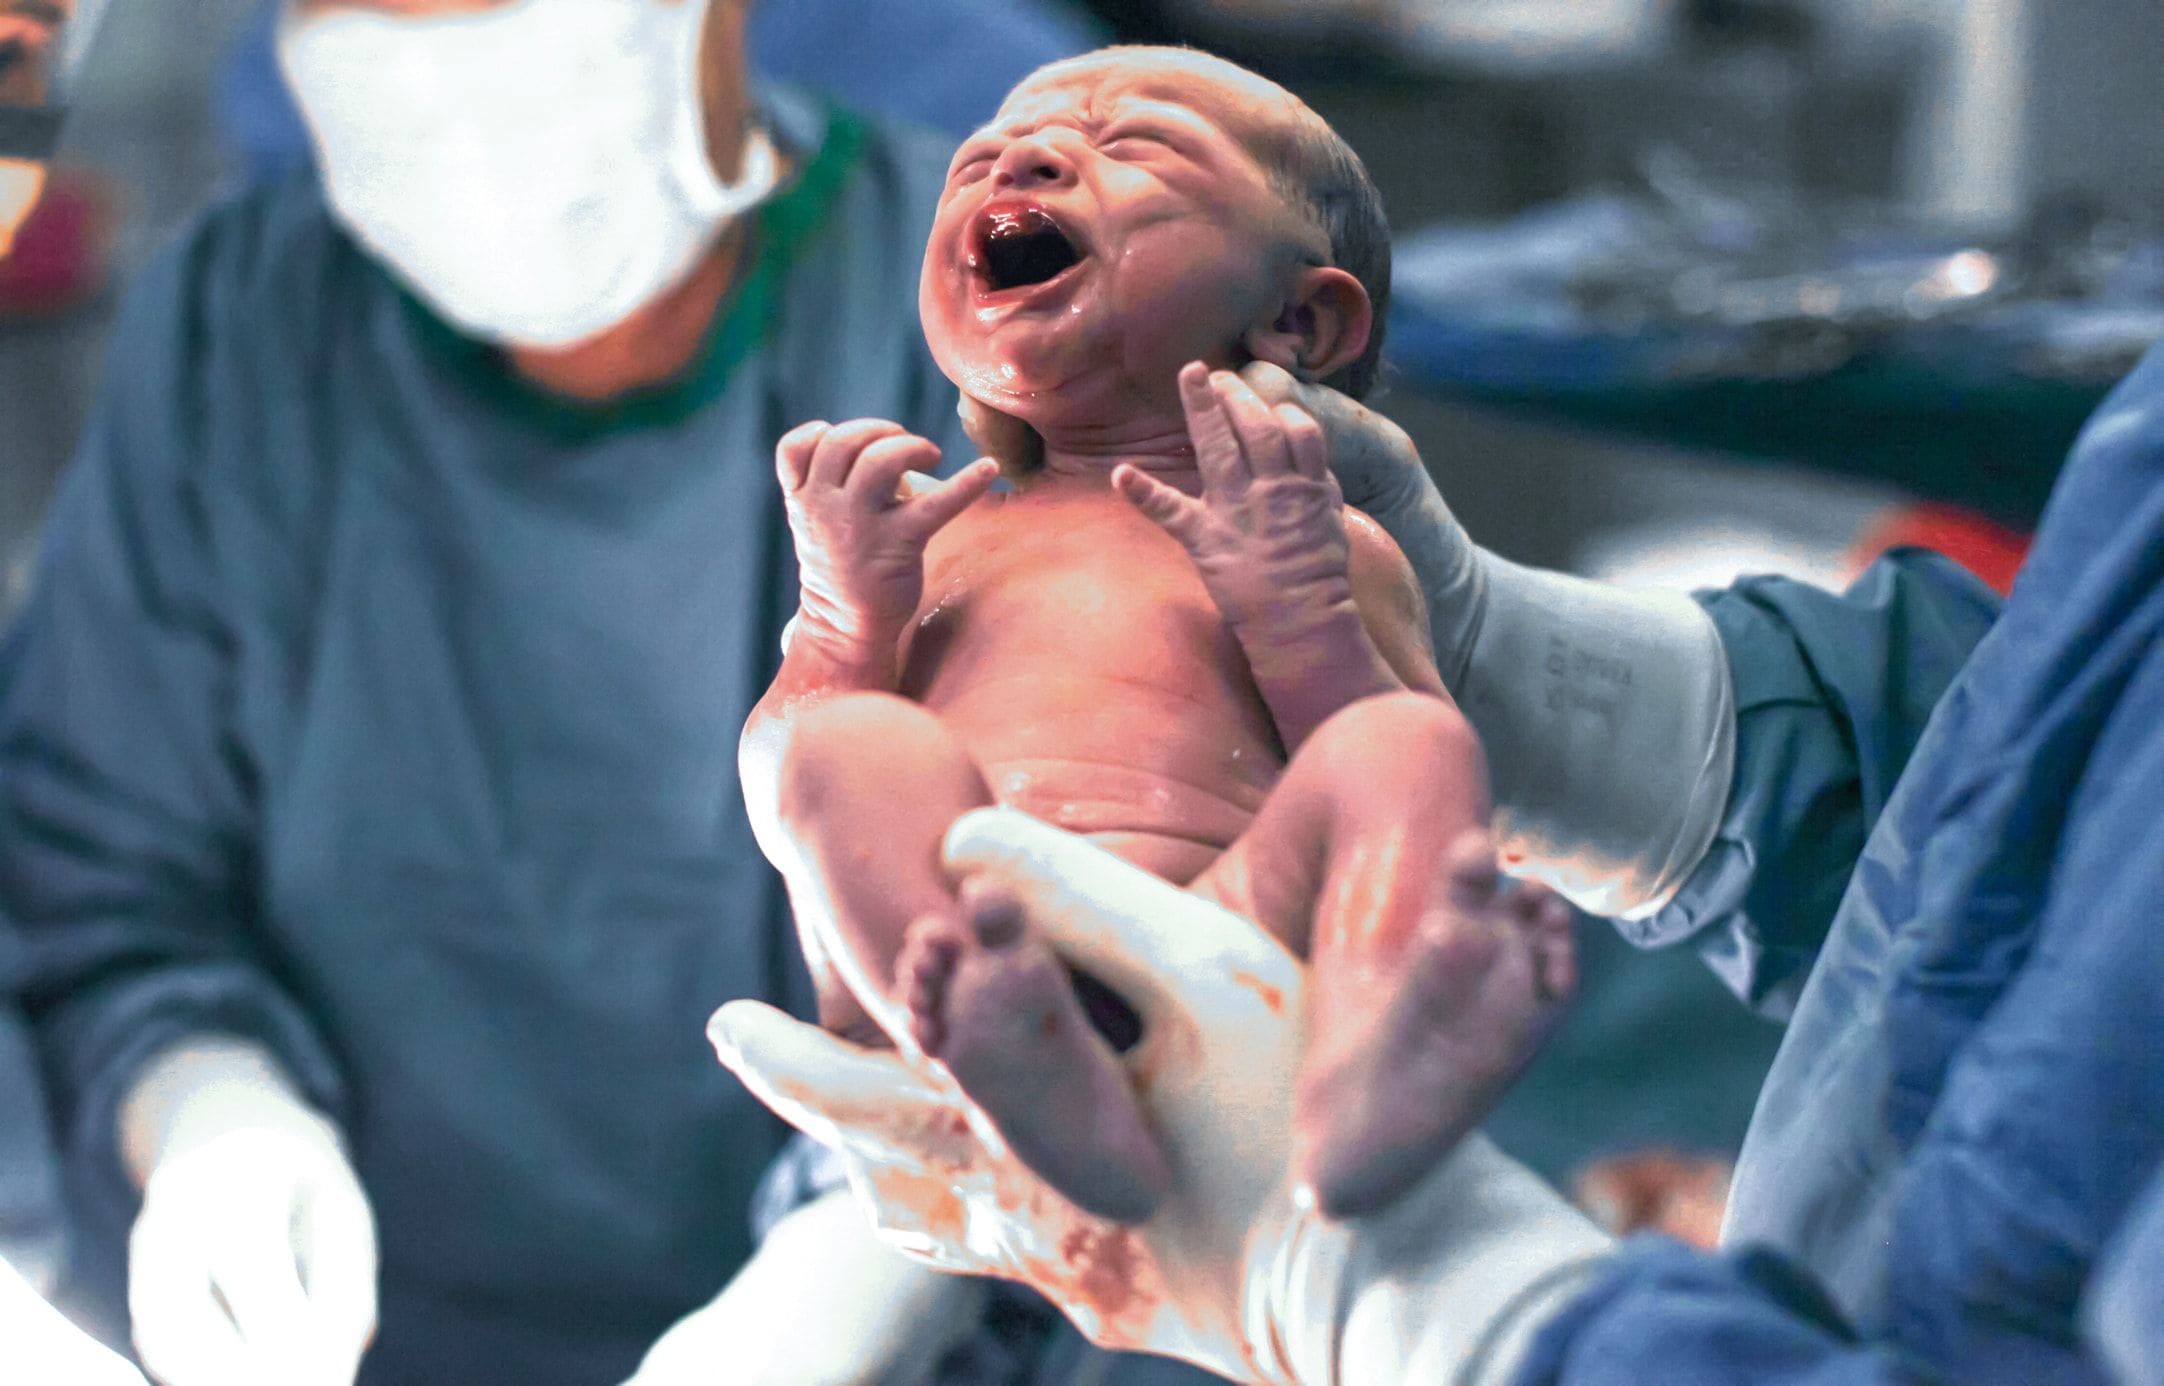 12 baby birth videos that (really) prepare you for the big day